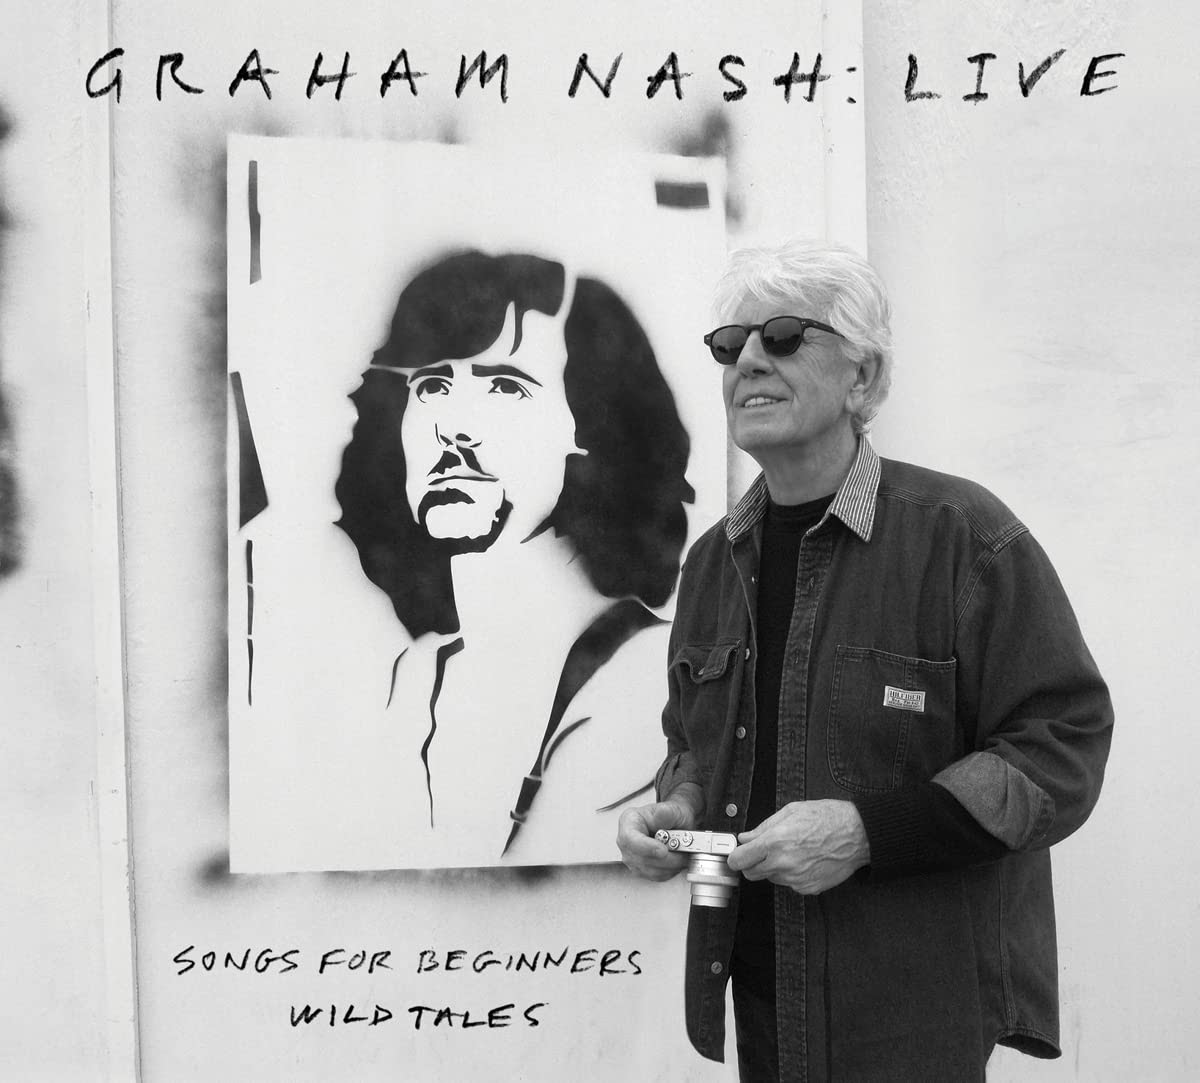 Graham Nash "Live: Songs For Beginners/Wild Tales"